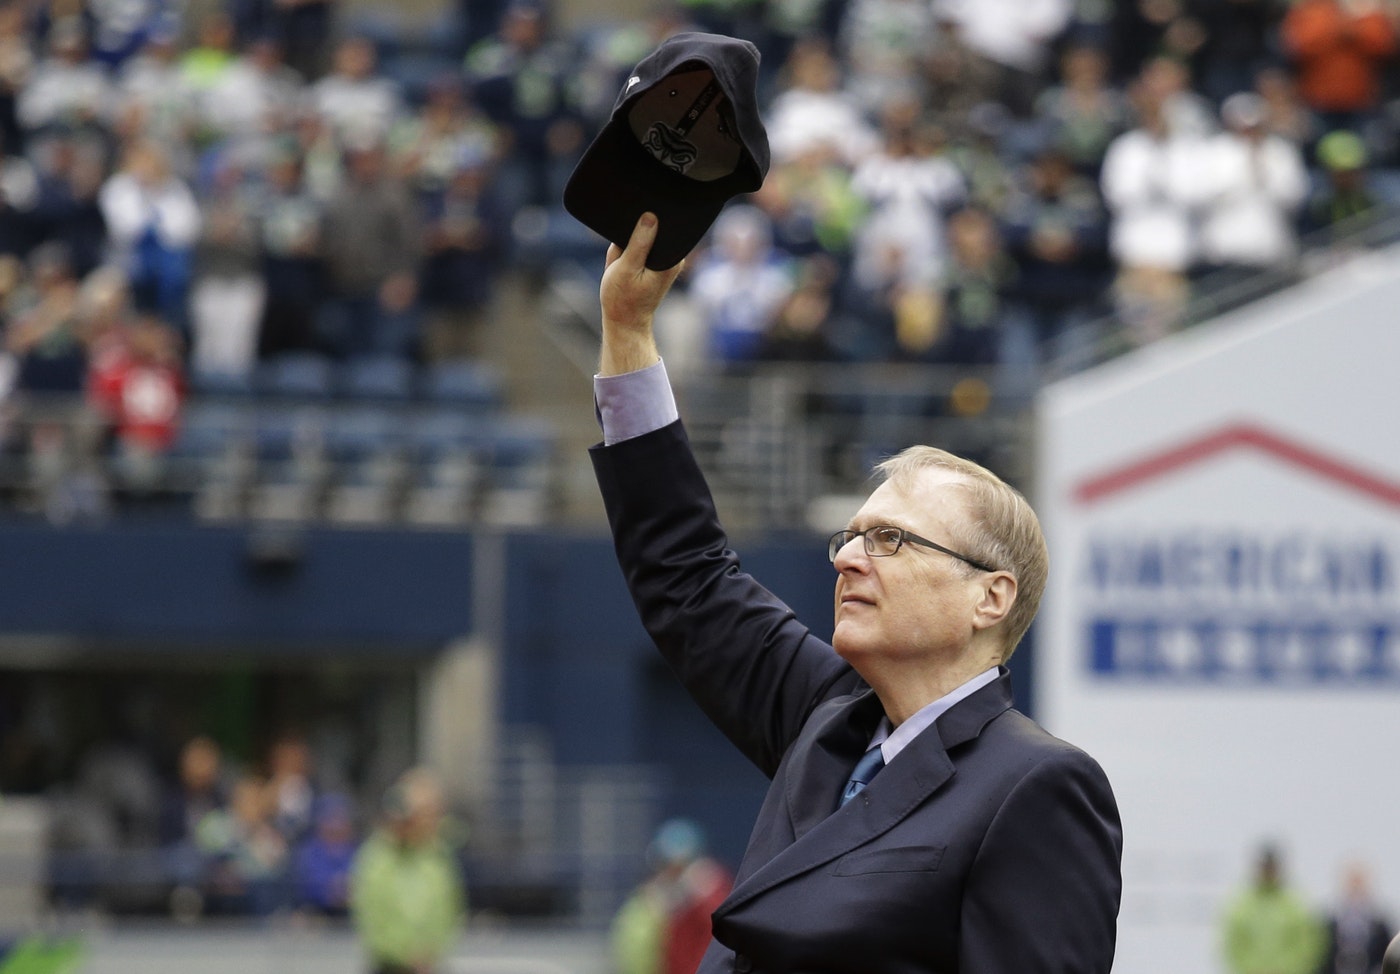 Seattle Seahawks owner Paul Allen tips his cap to fans as he is honored for his 20 years of team ownership before an NFL football game against the San Francisco 49ers, Sunday, Sept. 17, 2017, in Seattle. CREDIT: ELAINE THOMPSON